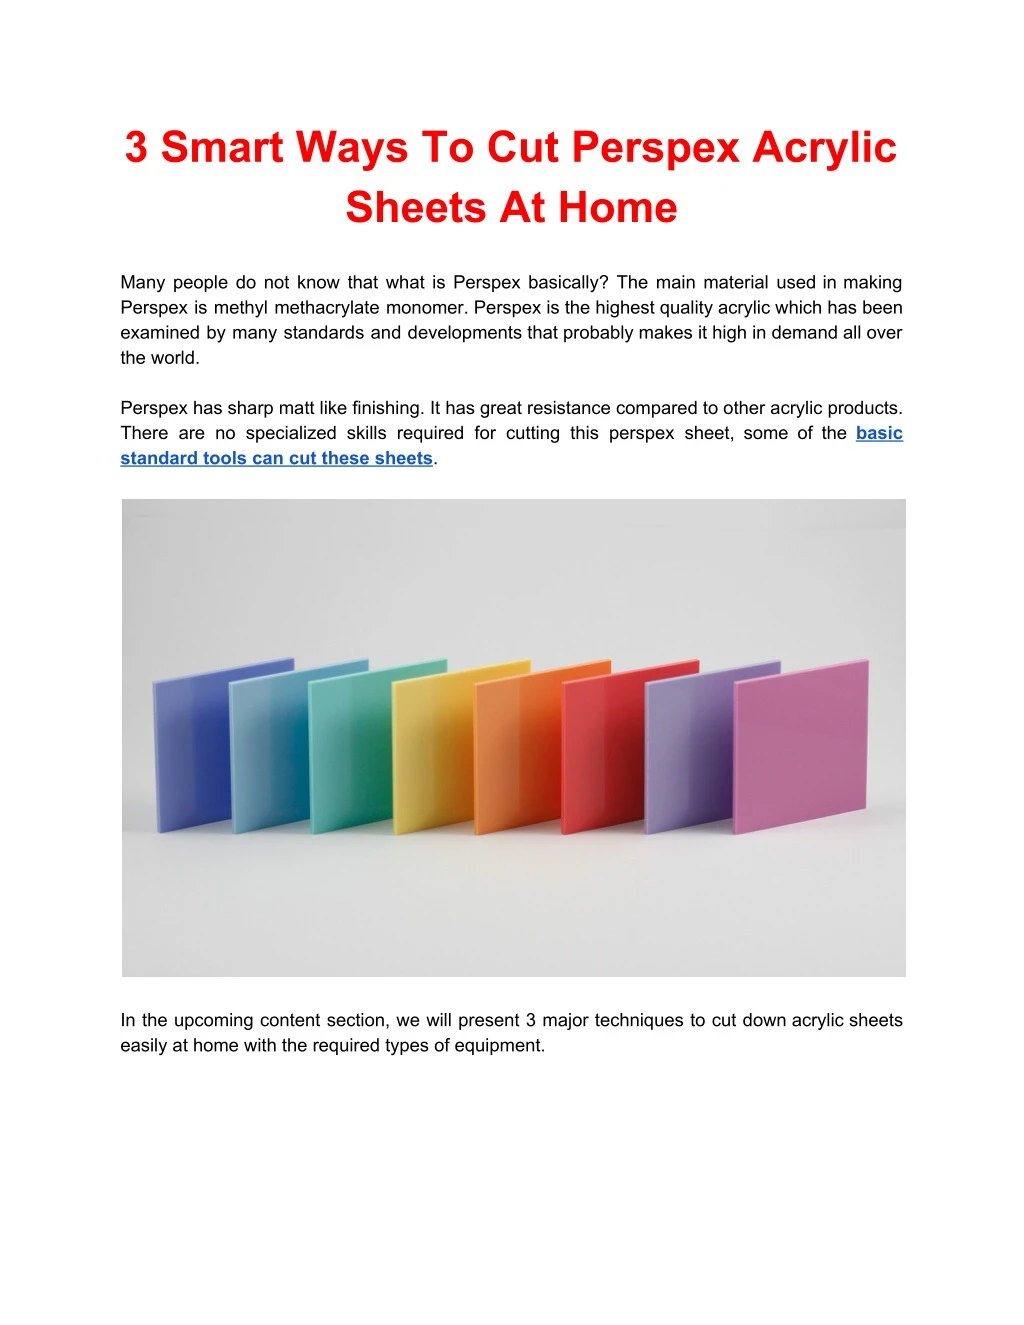 3 smart ways to cut perspex acrylic sheets at home n.